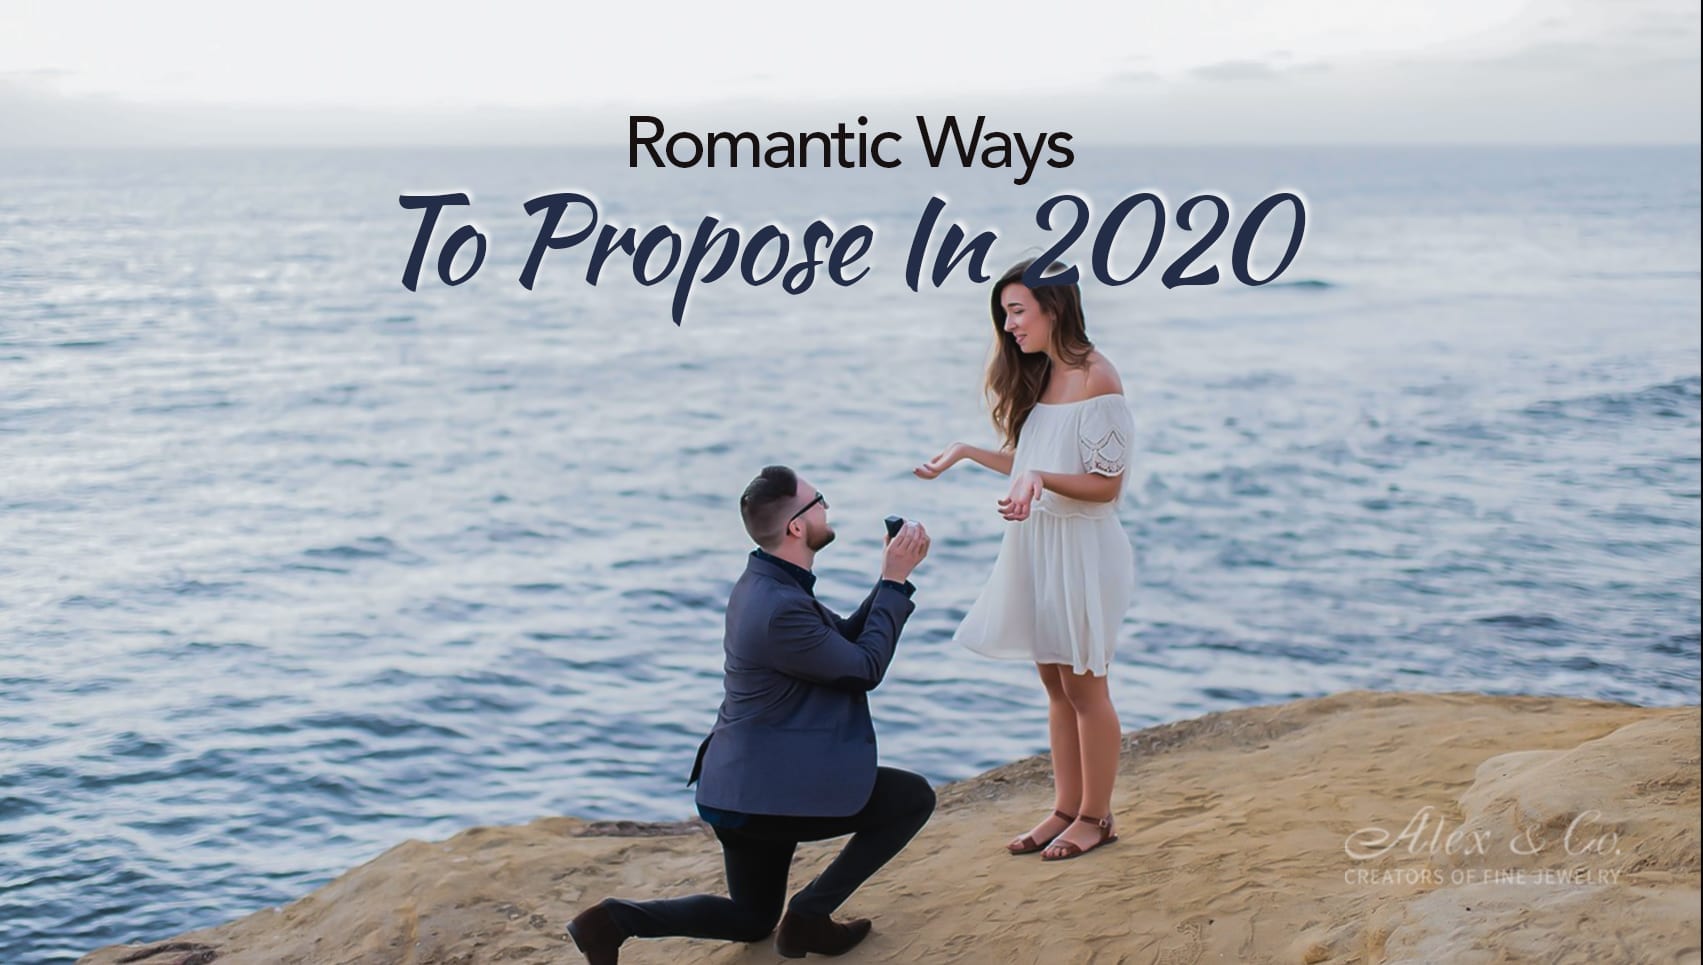 Romantic Ways To Propose In 2020 featured image